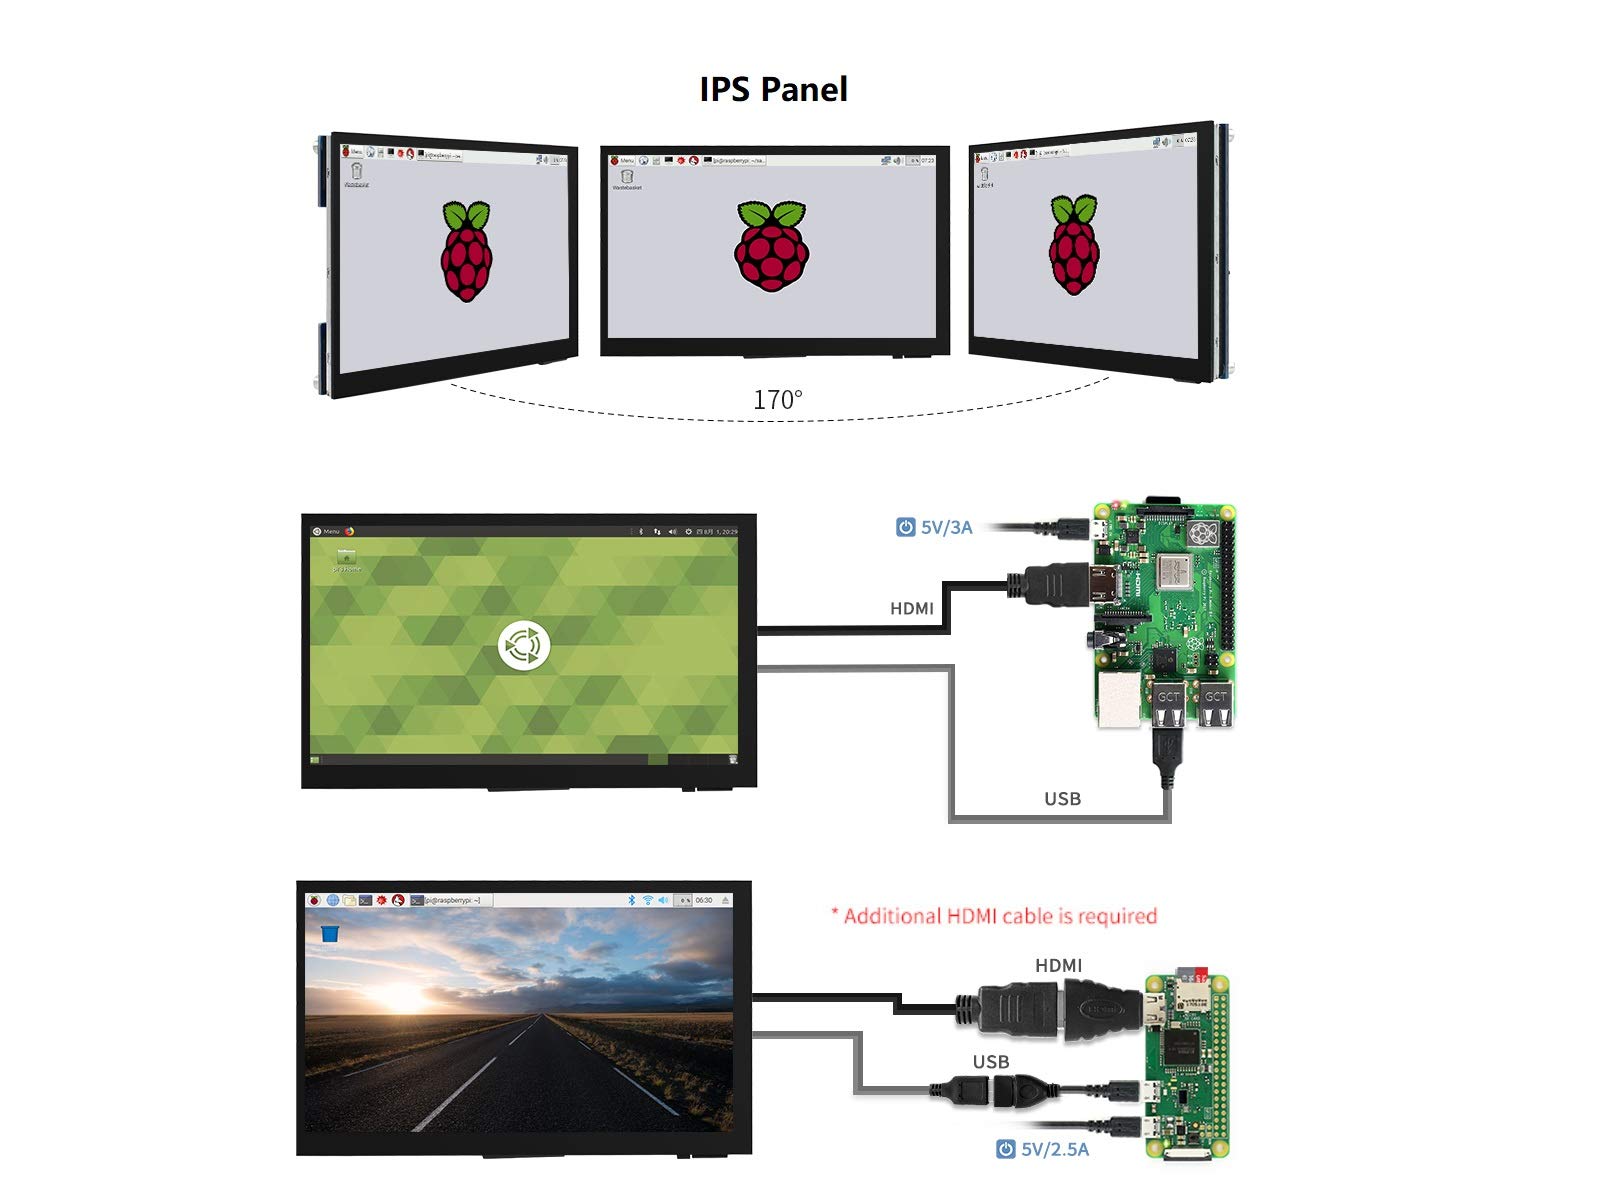 Ingcool 7 inch HDMI LCD 1024x600 Resolution Capacitive Touch Screen IPS Display Module Compatible with Raspberry Pi 4 3 2 1 B B+ A+, PC, Supports Windows 10/8.1/8 / 7